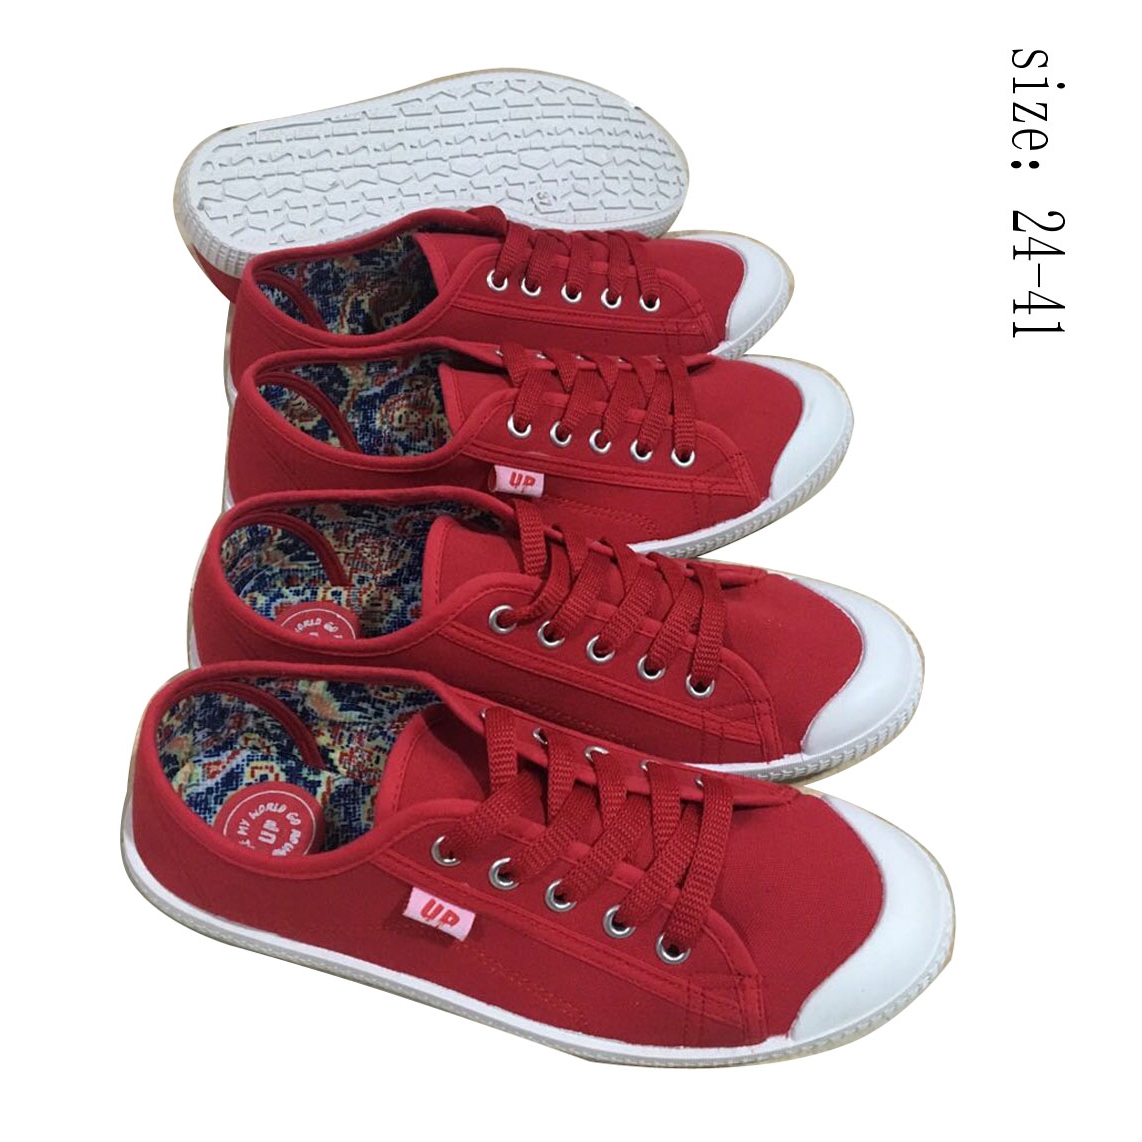 New design women casual shoes canvas shoes (HP19517-6) 1. ITEM...